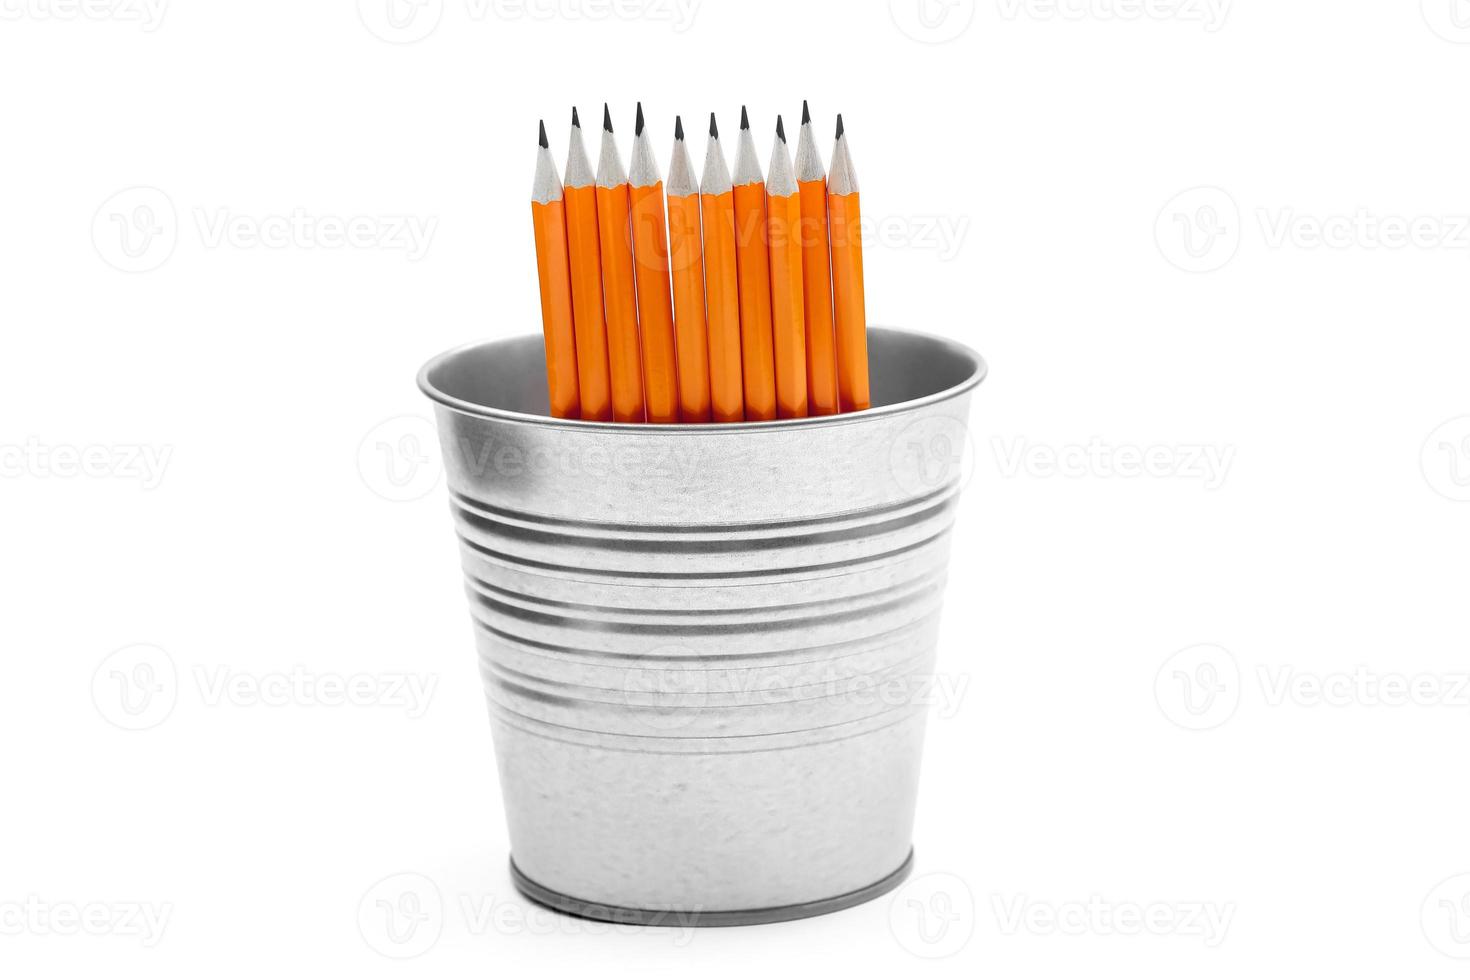 pencils on a white background in a bucket photo